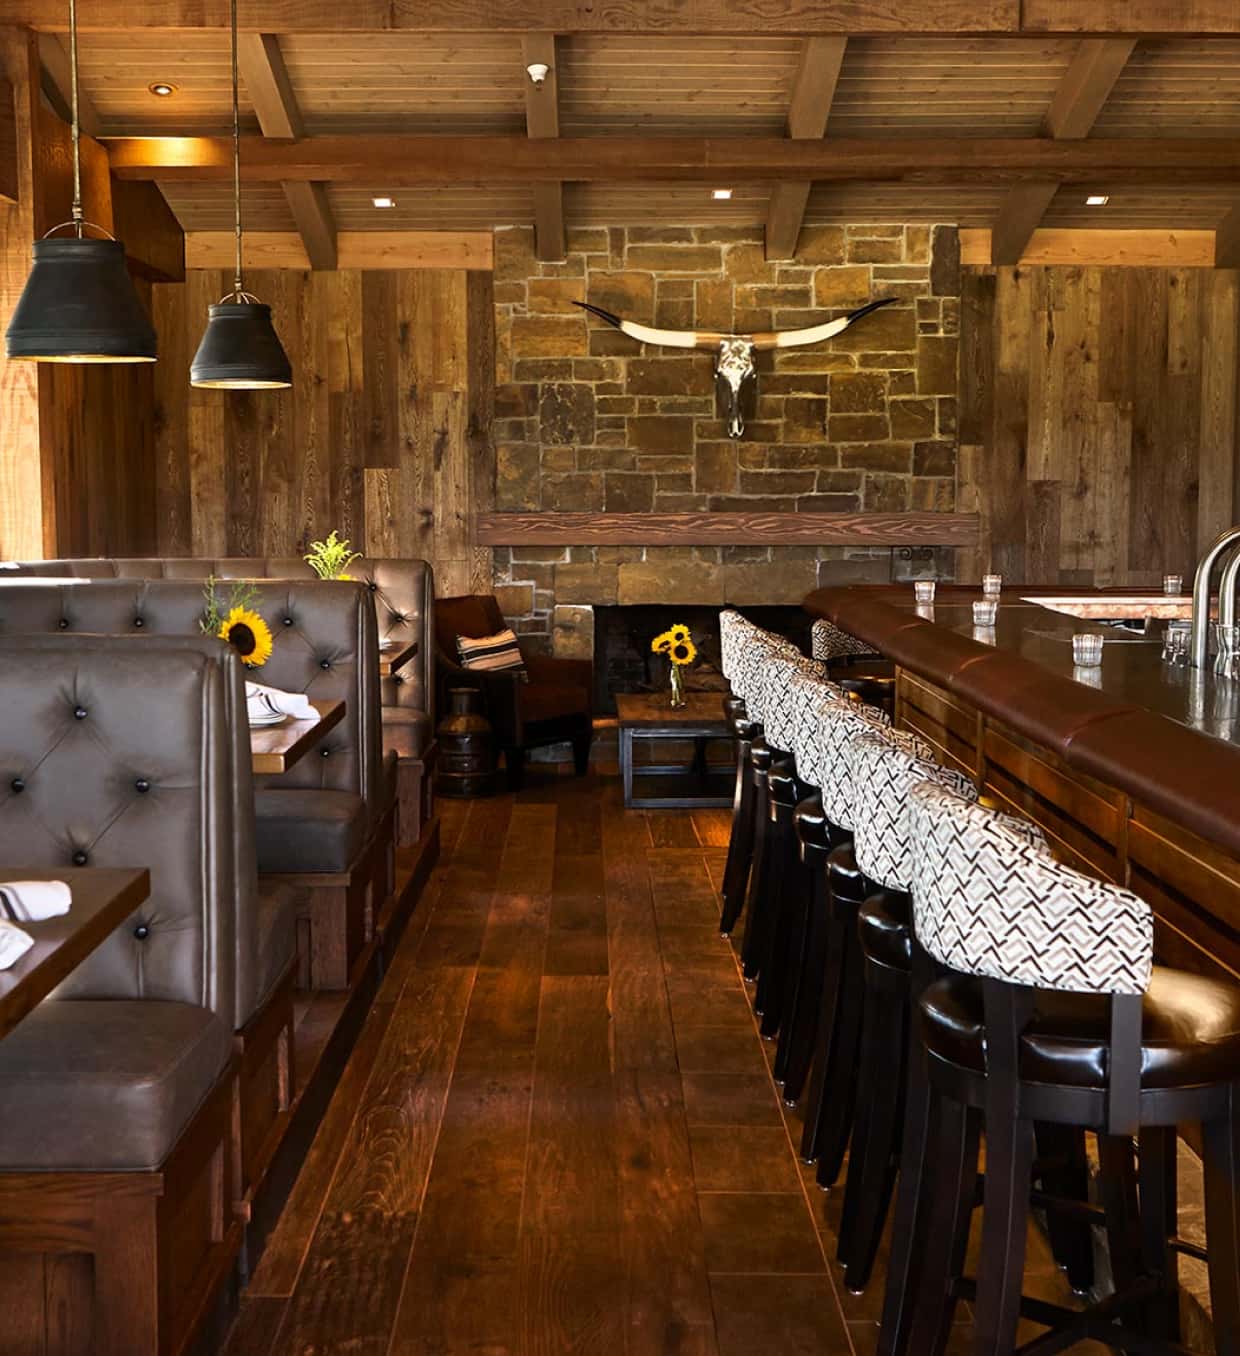 Interior view of 'CORK & FIRE' restaurant showing a rustic dining space with wood paneling, leather seats, black bar stools, and pendant lighting.